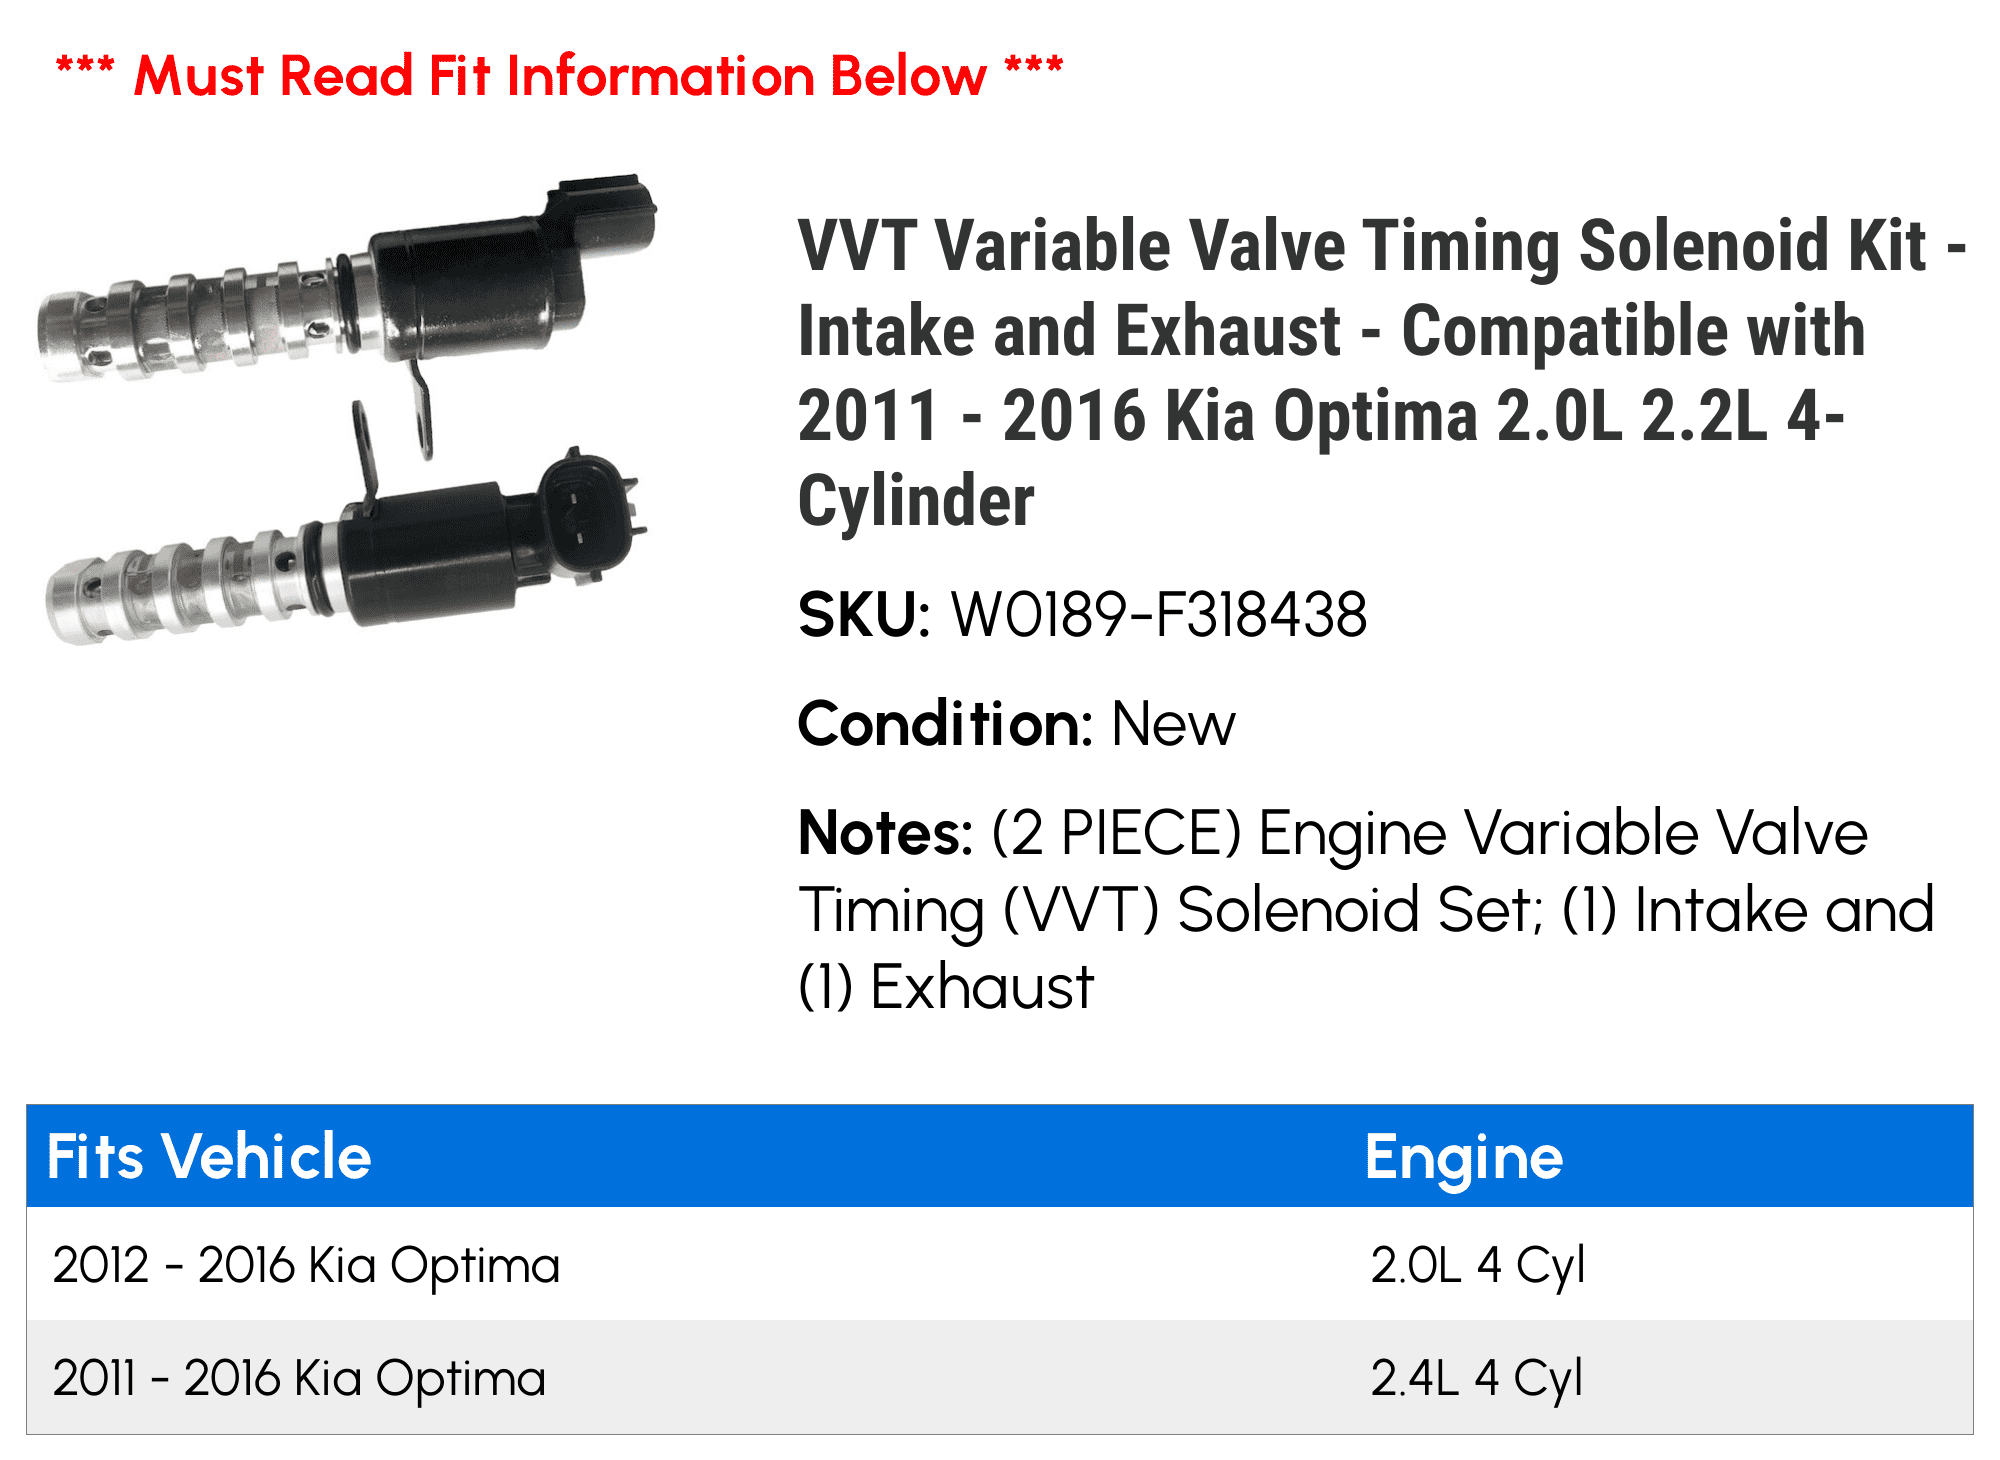 VVT Variable Valve Timing Solenoid Kit Intake and Exhaust Compatible  with 2011 2016 Kia Optima 2.0L 2.2L 4-Cylinder 2012 2013 2014 2015 